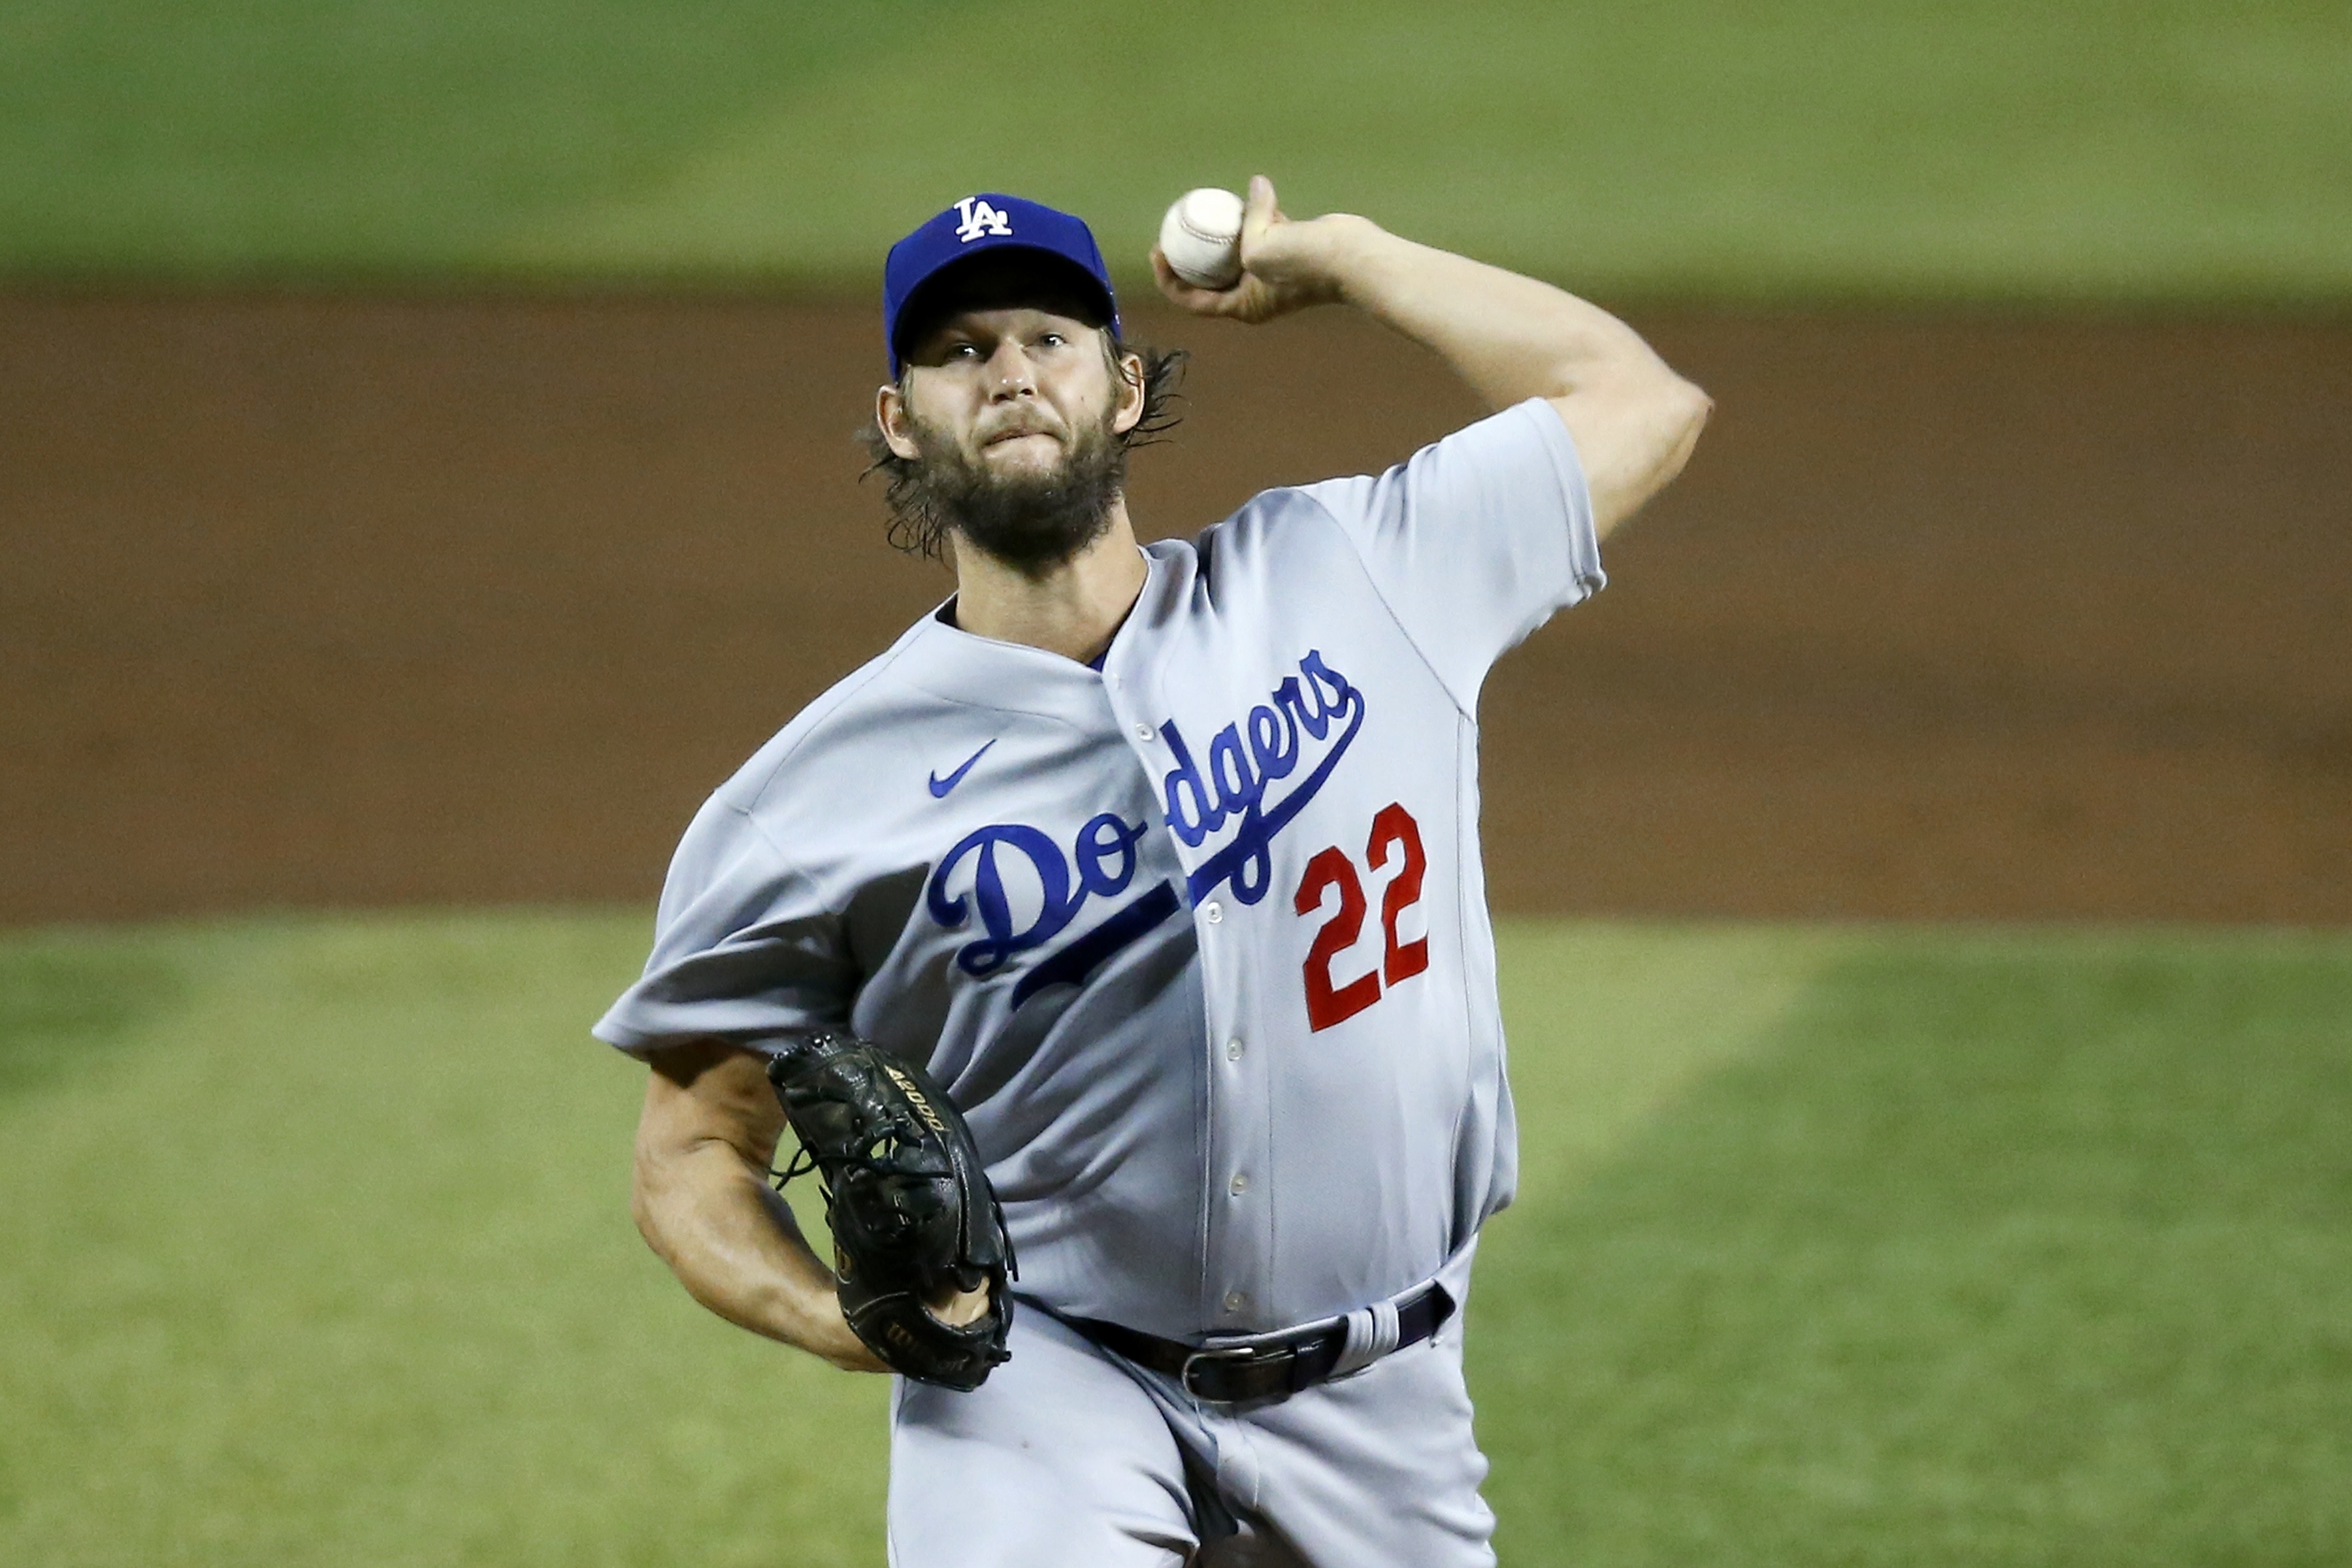 Mother of Dodgers star Clayton Kershaw dies; he plans to pitch